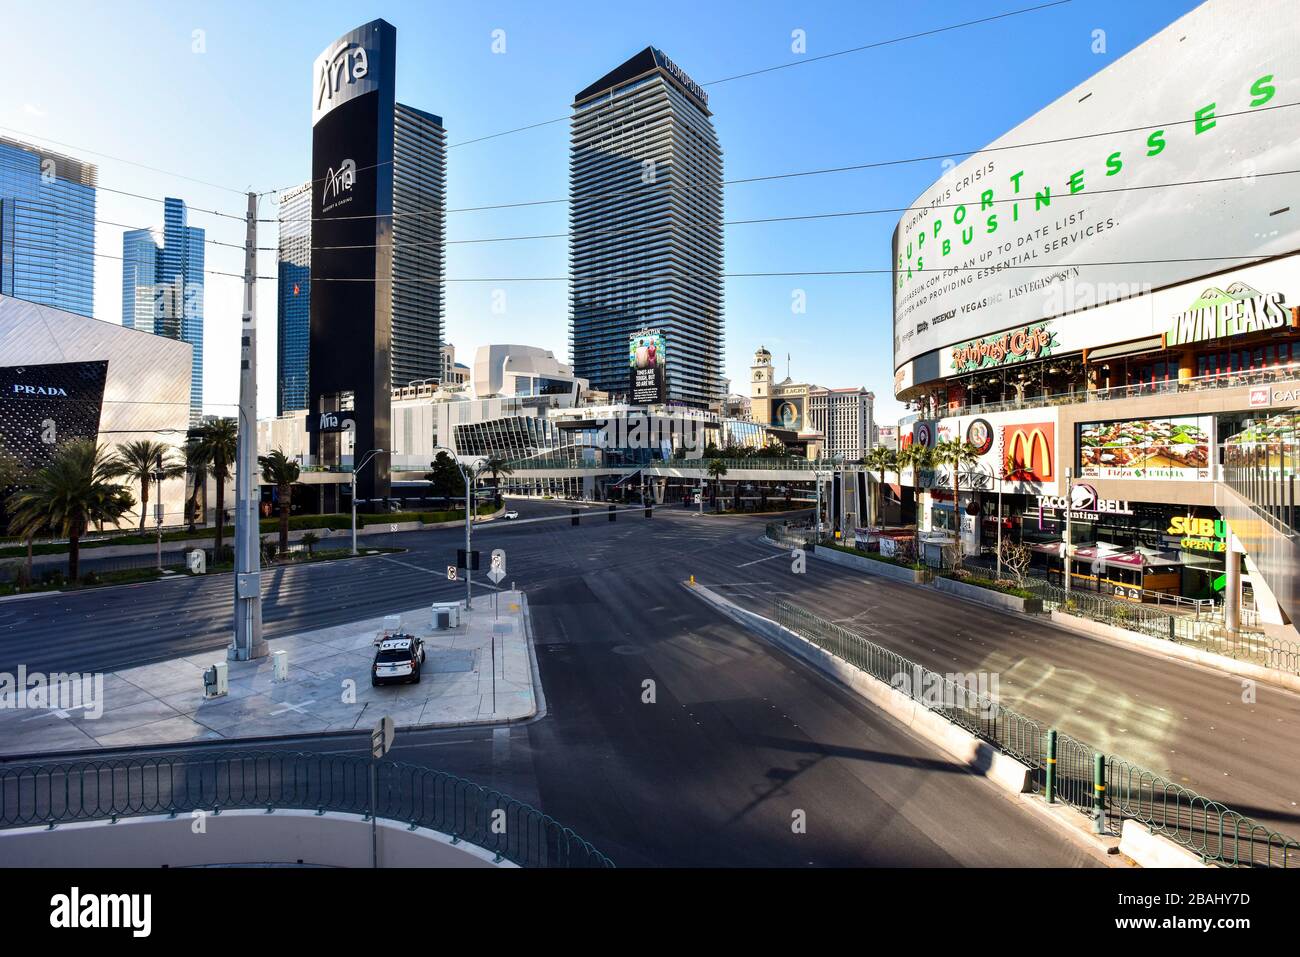 One week into the Las Vegas shut down due to Coronavirus, the Strip is fairly empty. Most residents seem to be heeding Governor Sisolak’s request you “Stay home for Nevada” with evidence of throughout Clark County, NV. The Empty Streets of Las Vegas Near The Aria Casino and Resort on Las Vegas Blvd. Photo Credit: Ken Howard/Alamy Stock Photo